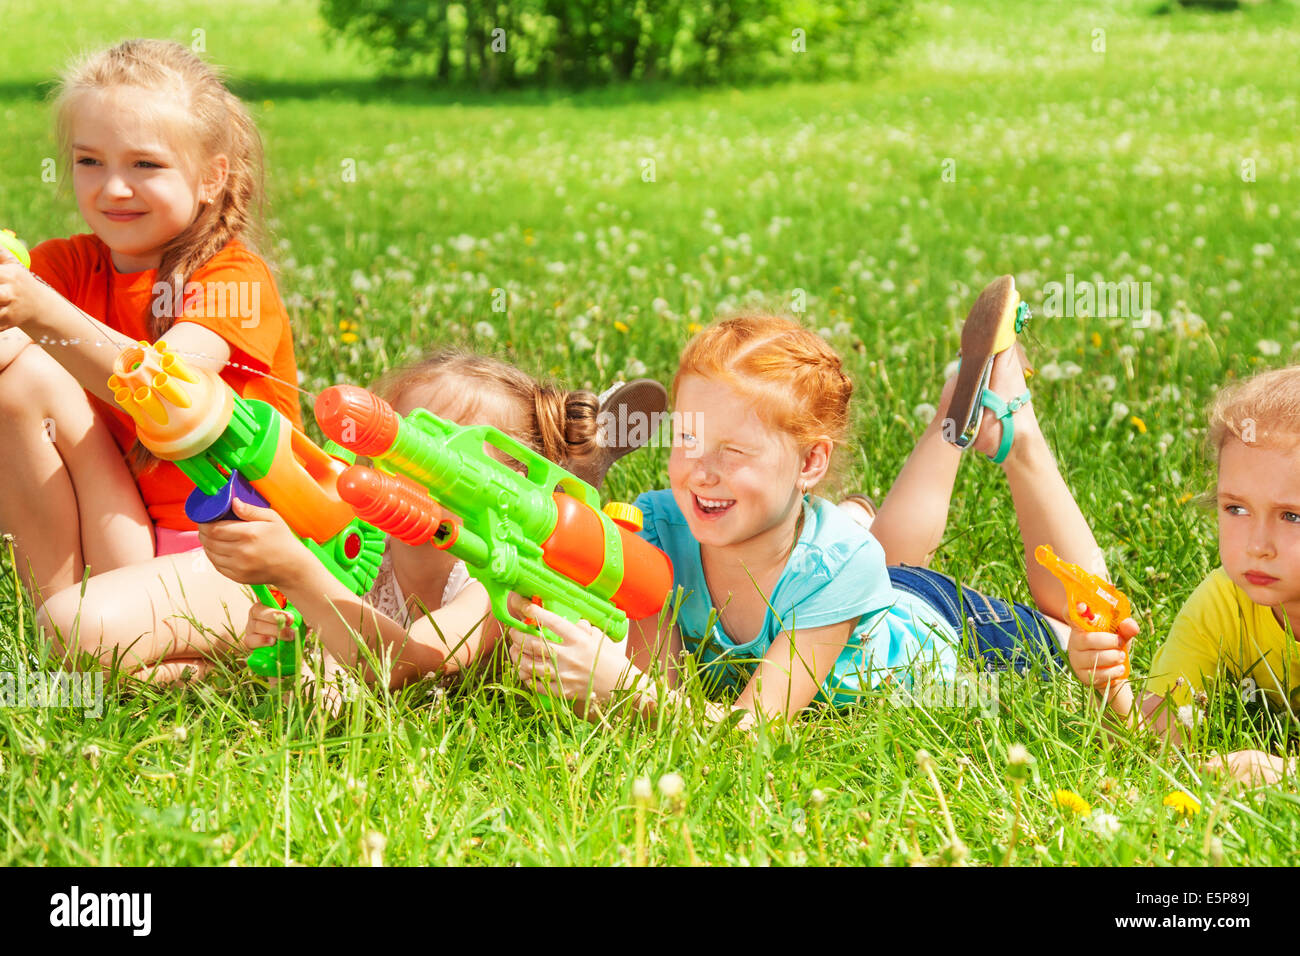 Children play with water guns on a meadow Stock Photo